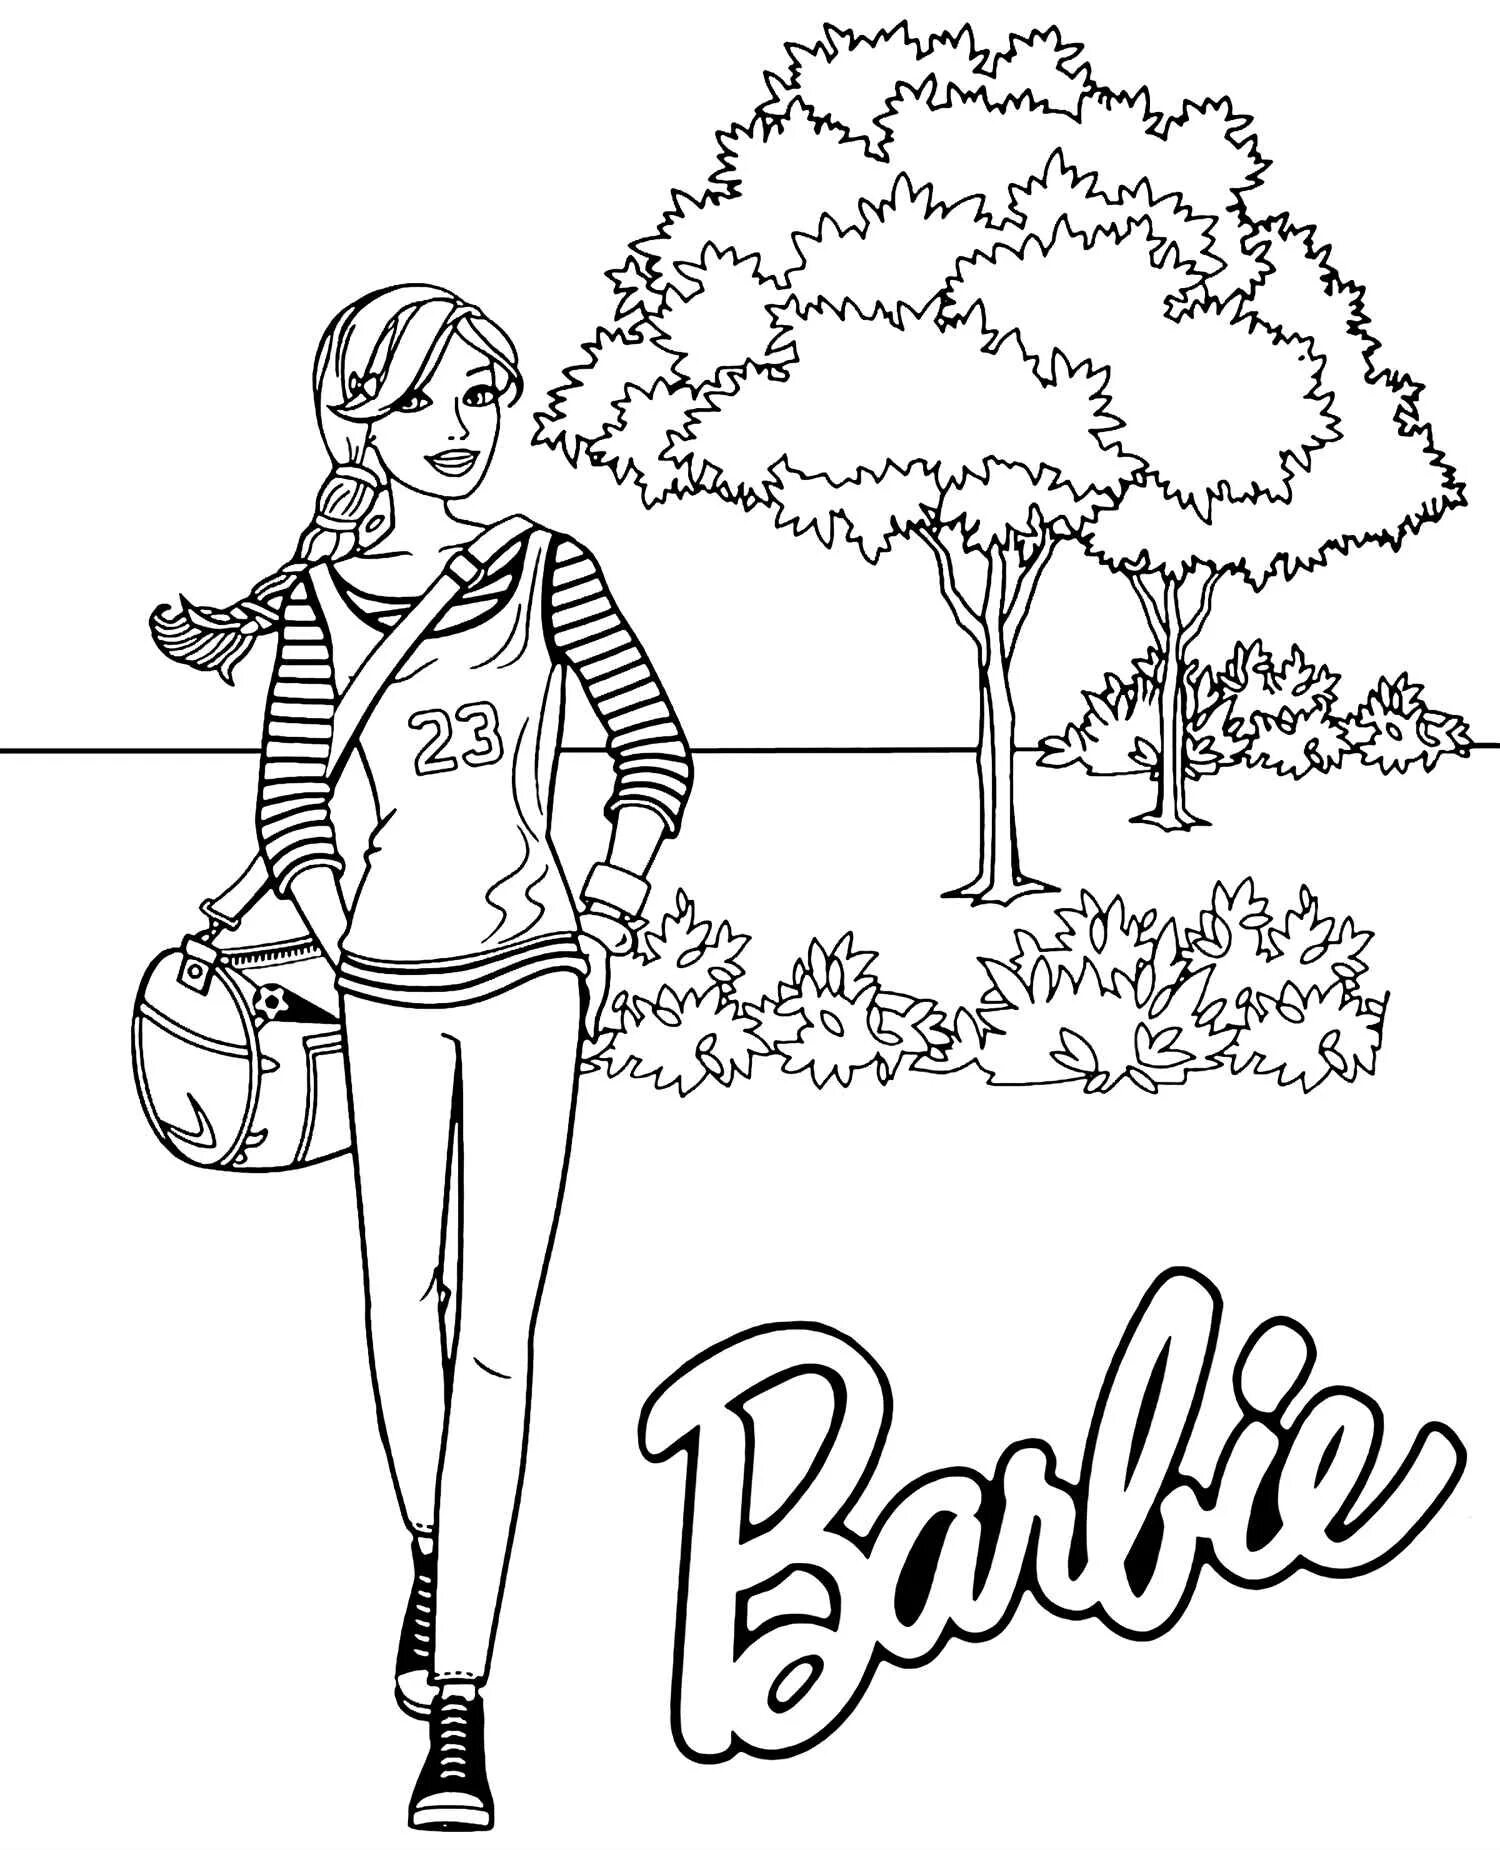 Chelsea glamor doll coloring page